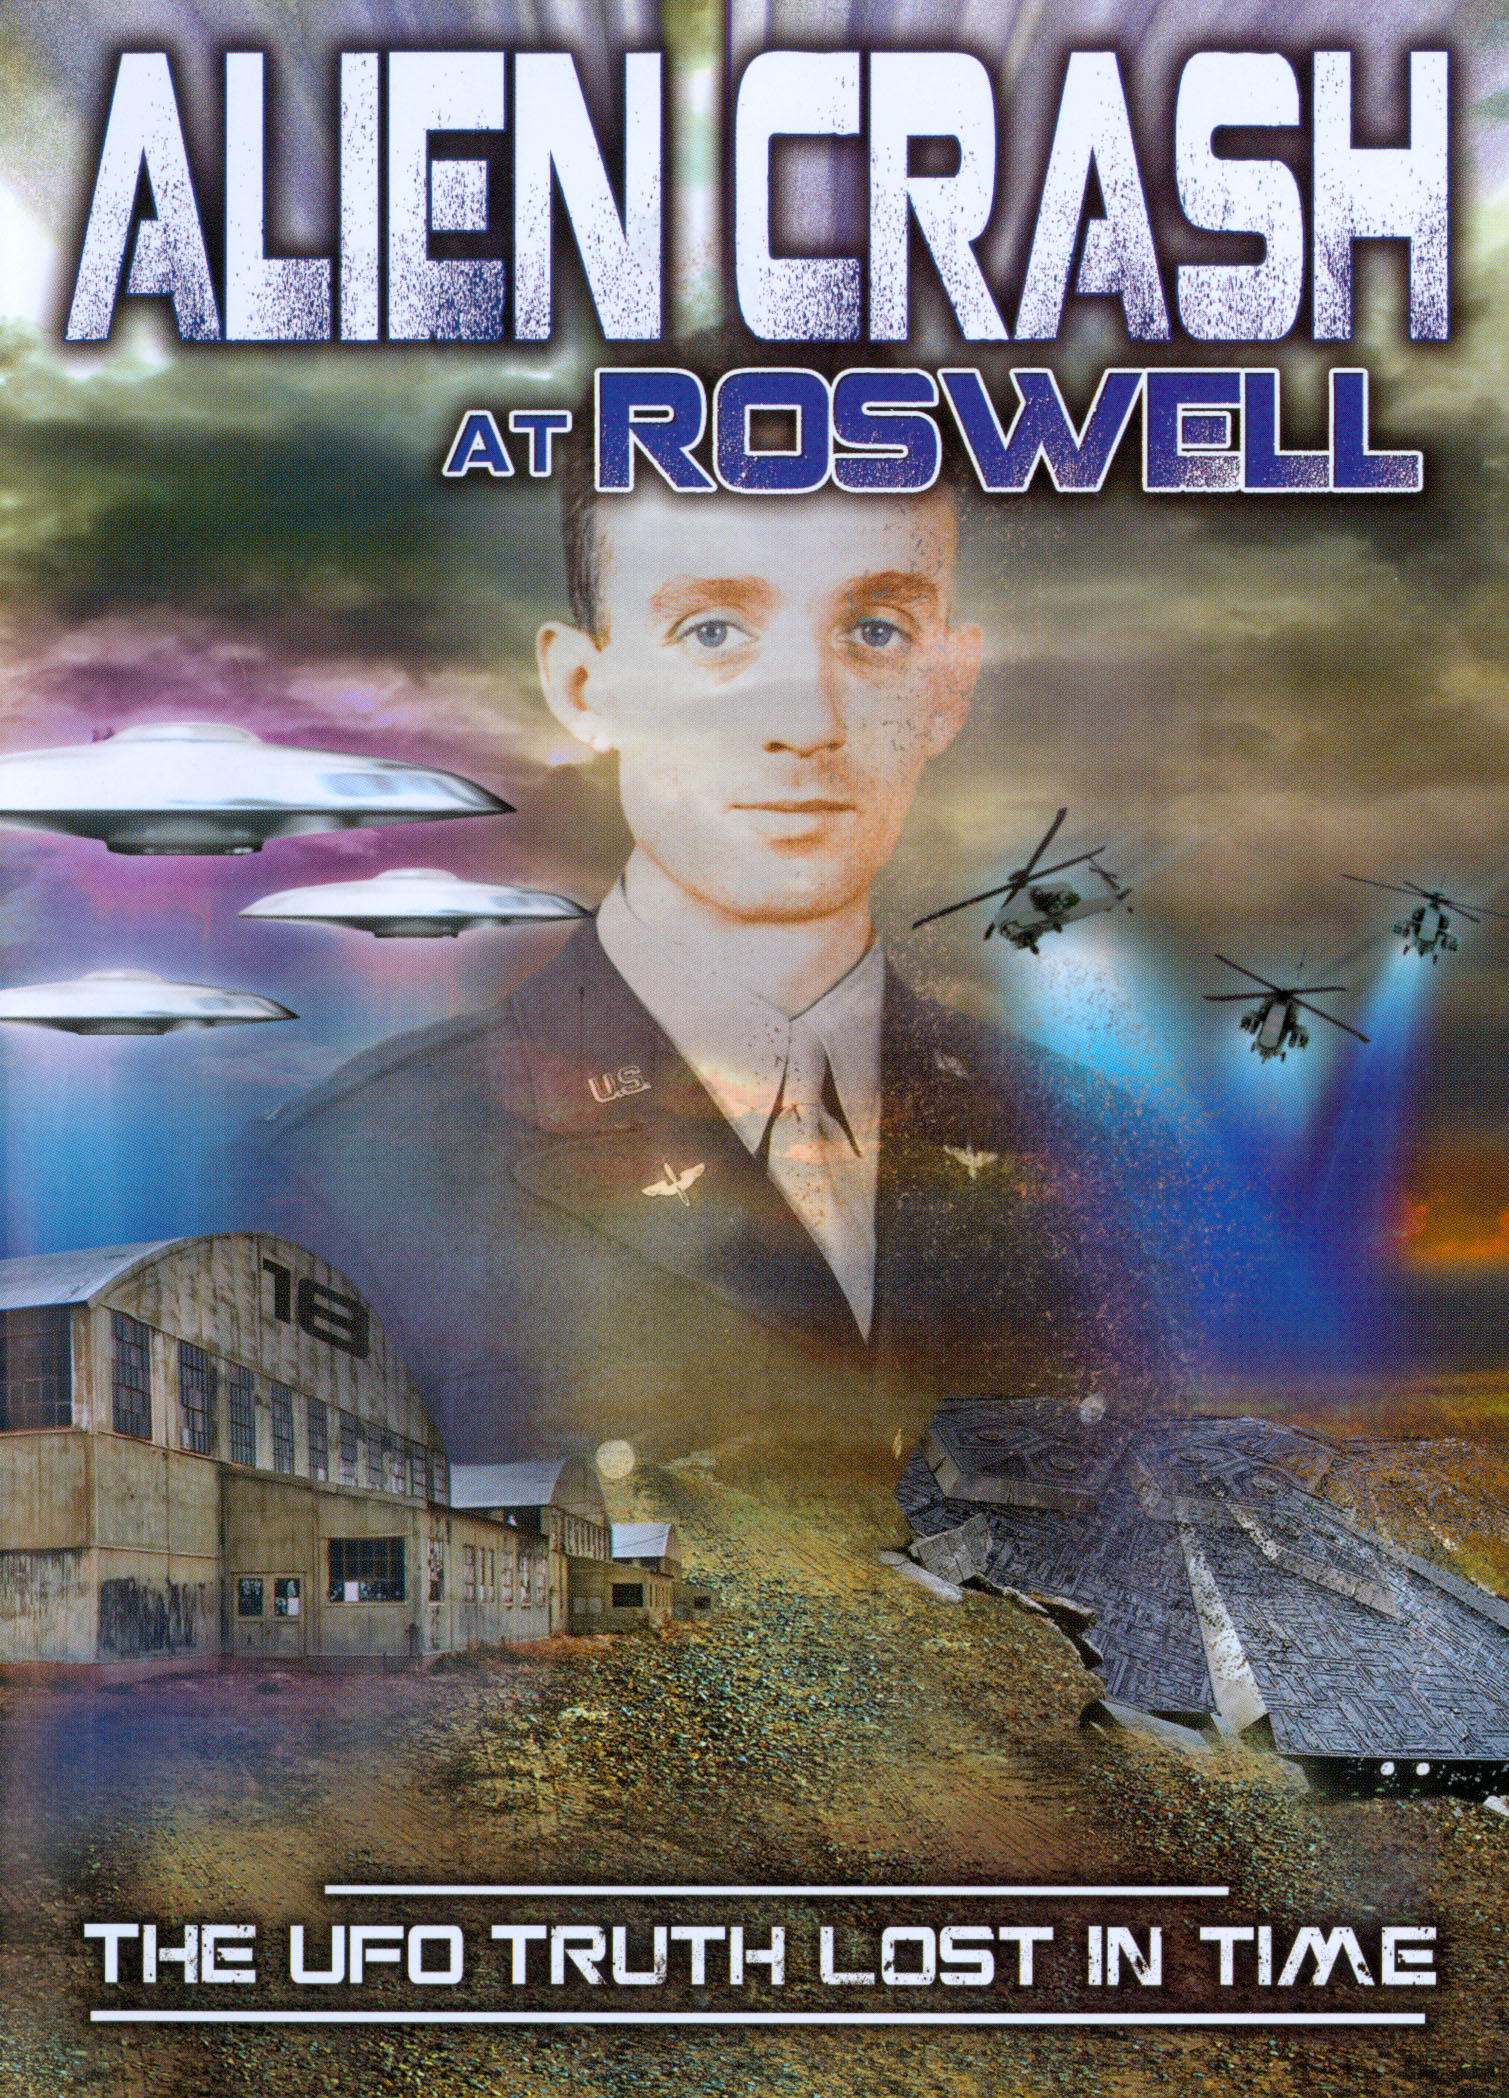 Alien Crash at Roswell: The UFO Truth Lost in Time [DVD] [2013]